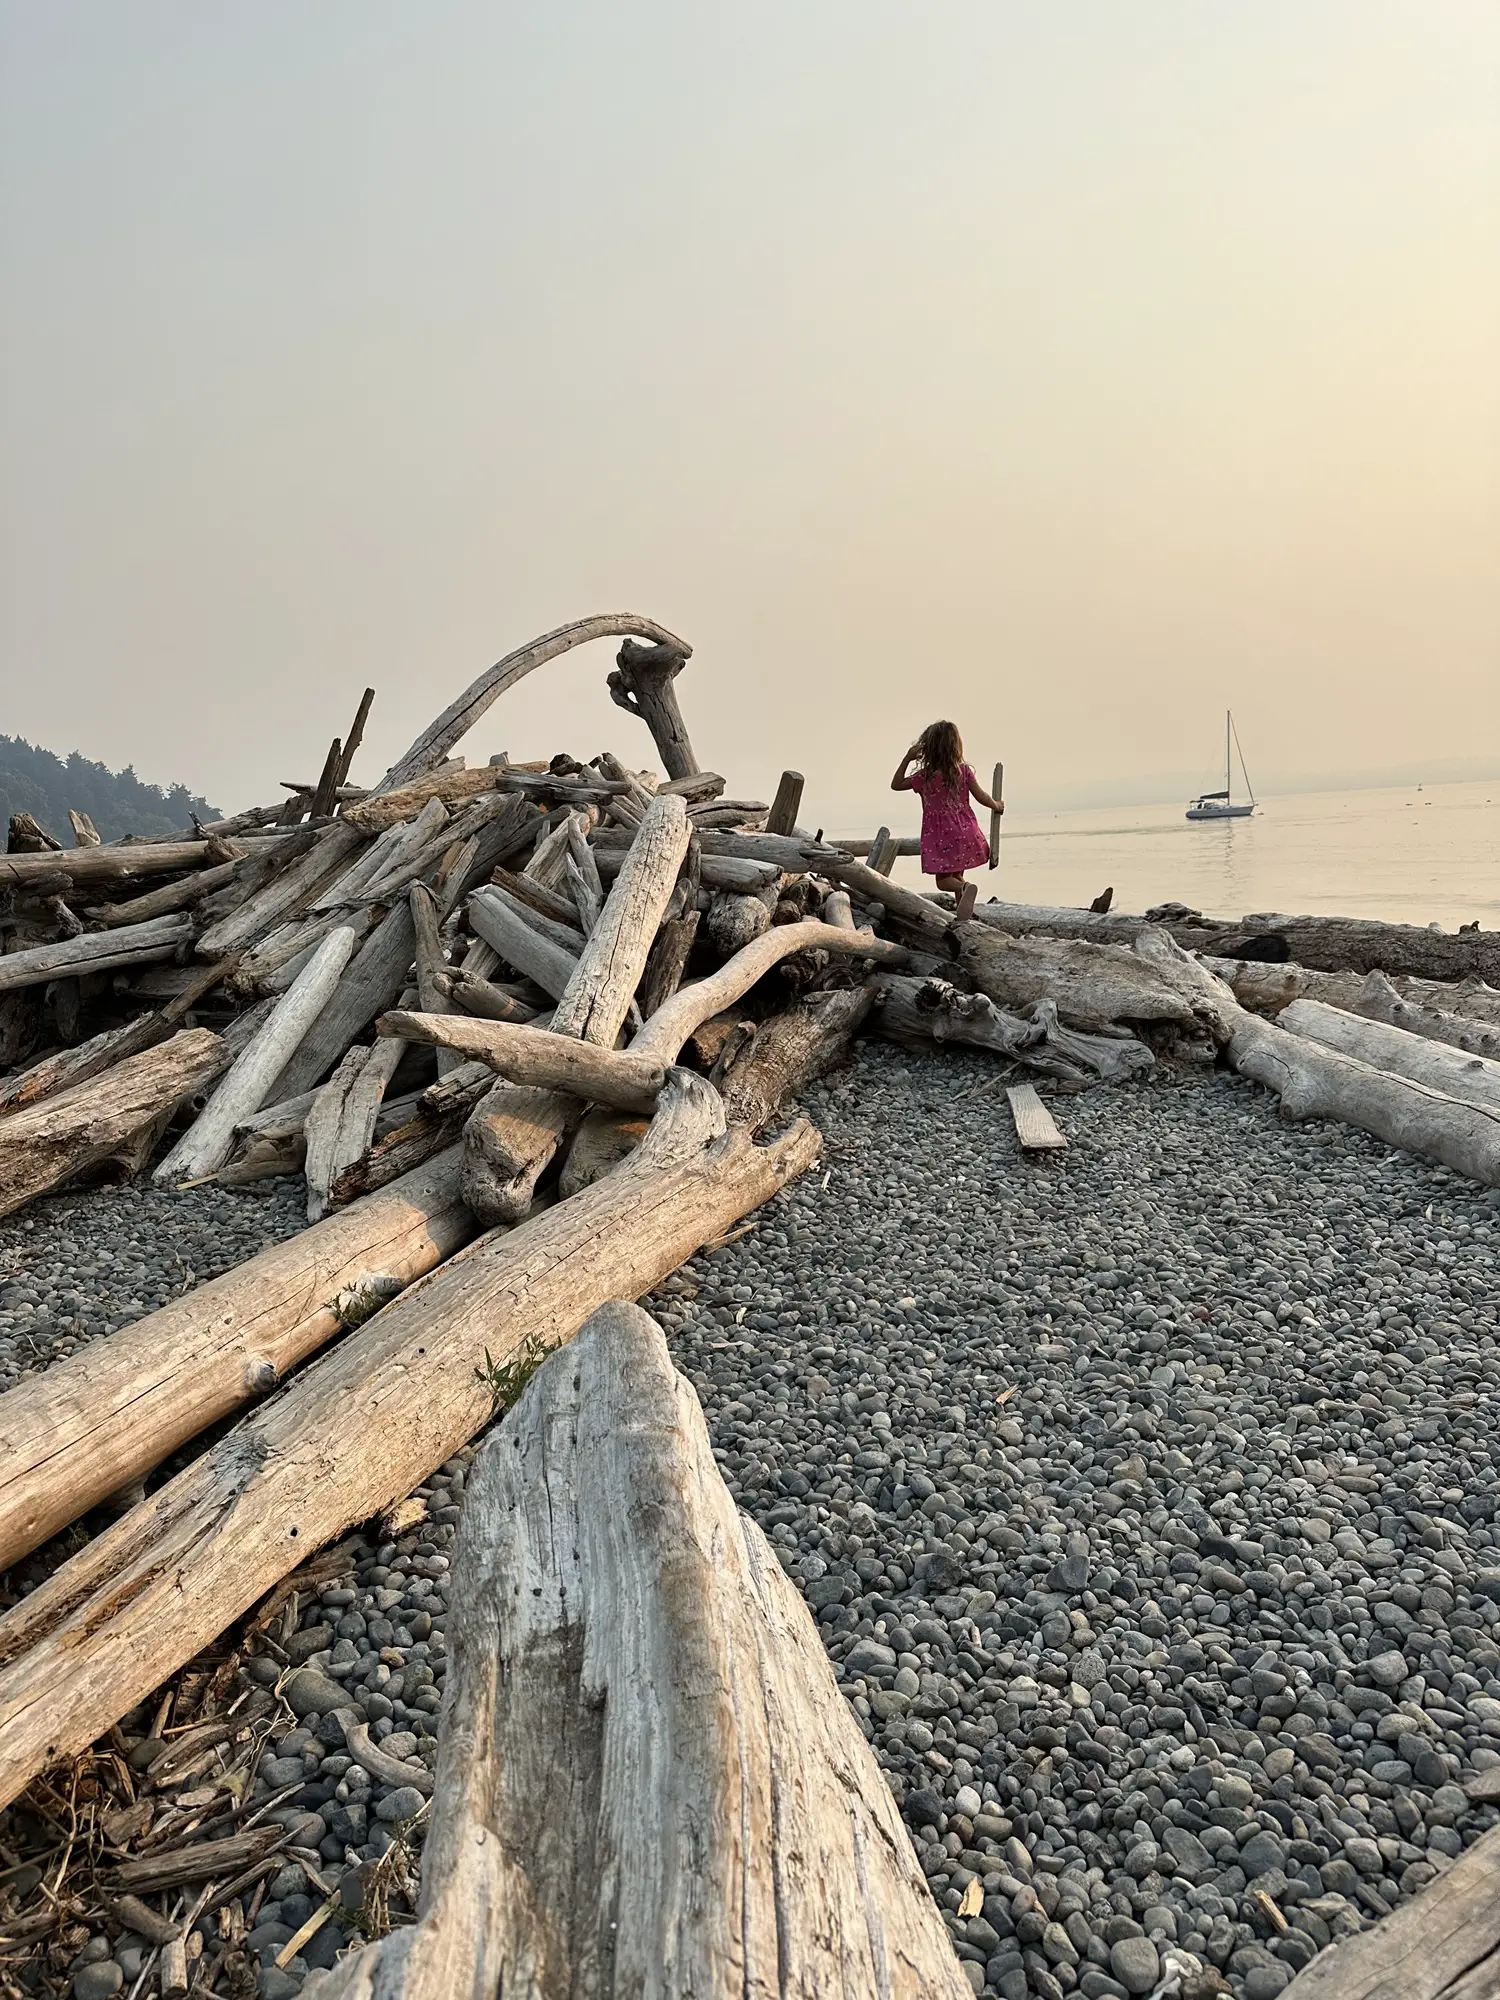 Lowman Beach is a great activity with kids in West Seattle to beat the crowds